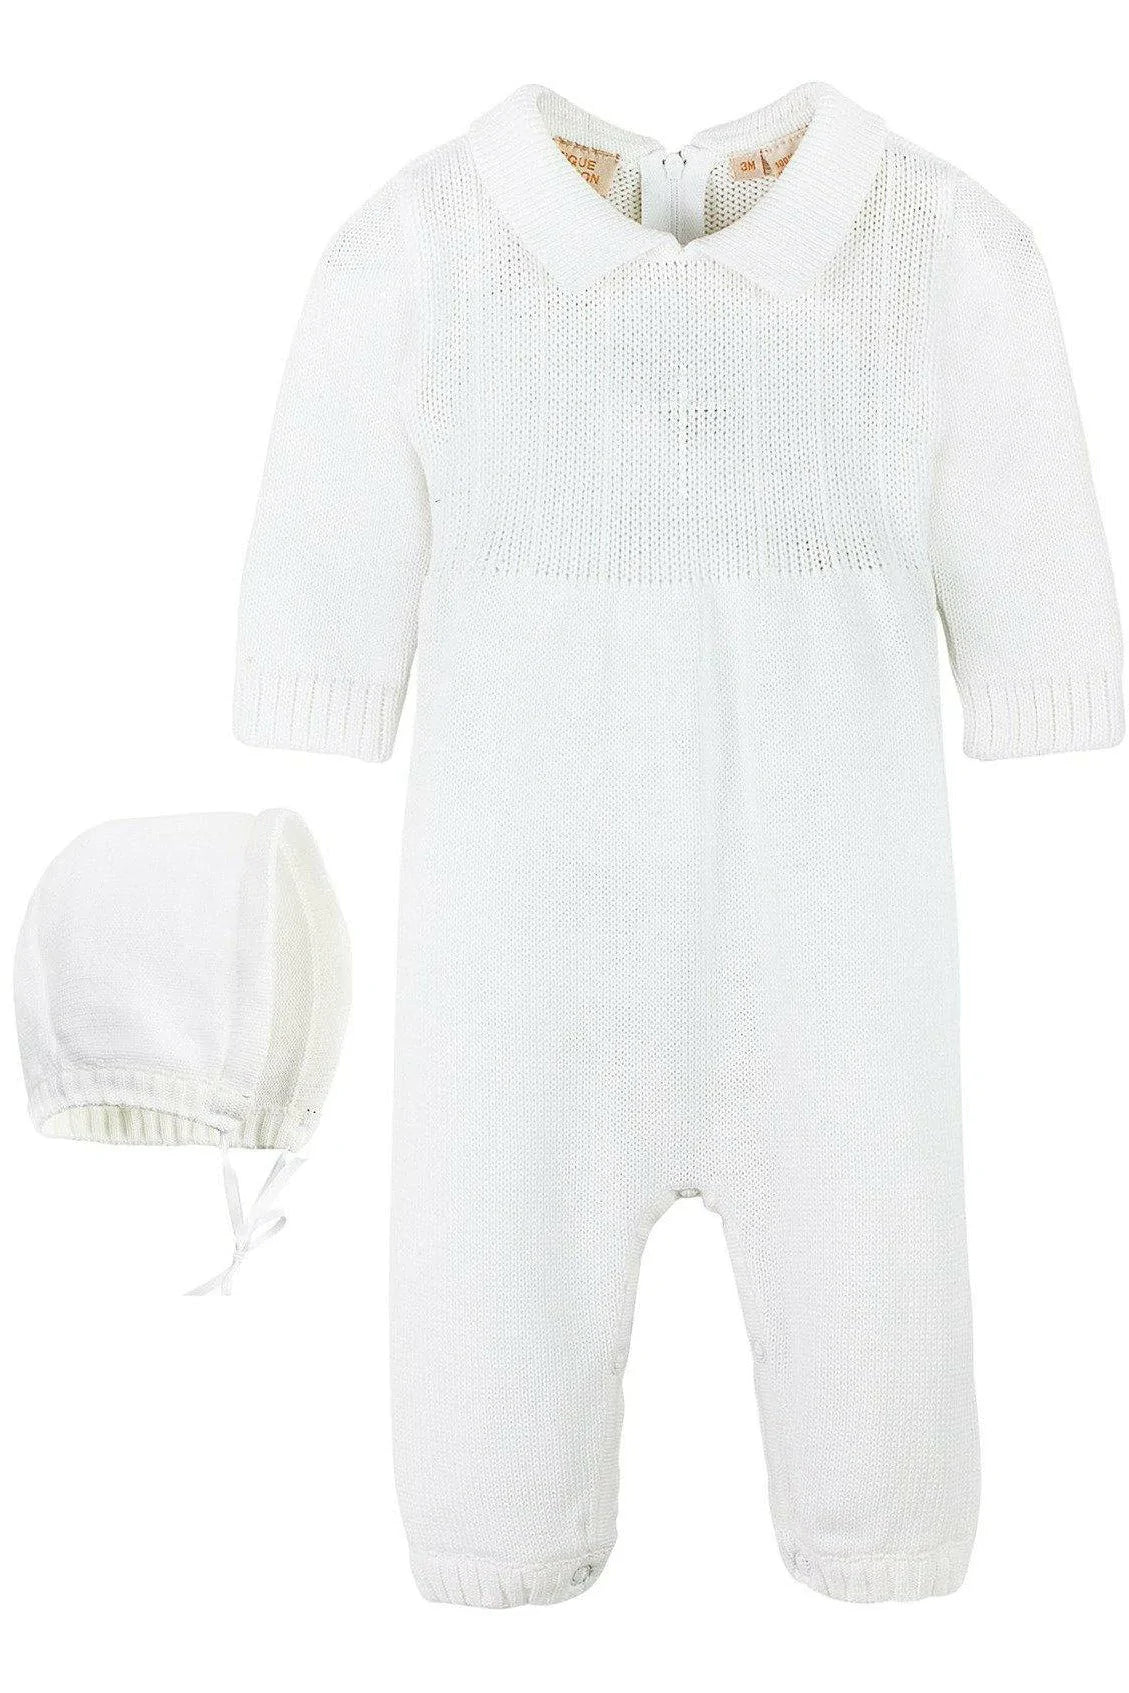 Cross Sweater Outfit with Bonnet  - Doodlebug's Children's Boutique